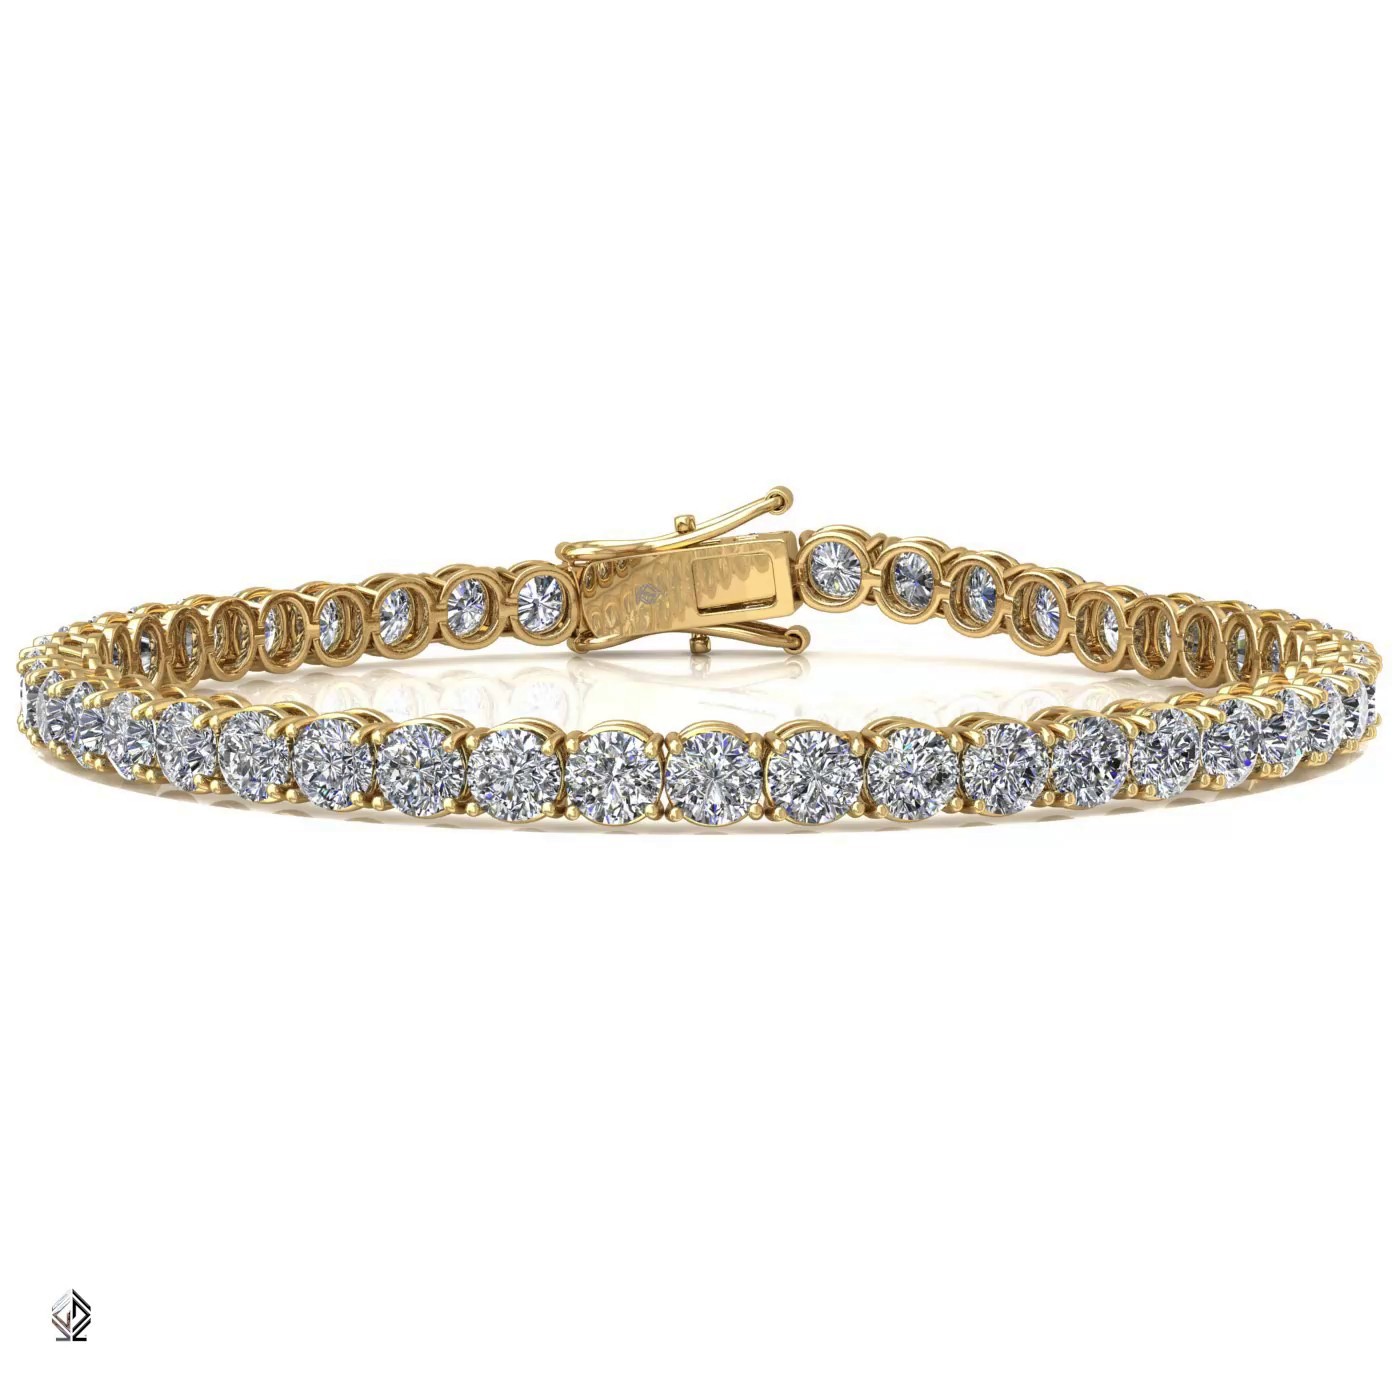 18k yellow gold 3.0 mm 4 prong round shape diamond tennis bracelet in round setting Photos & images